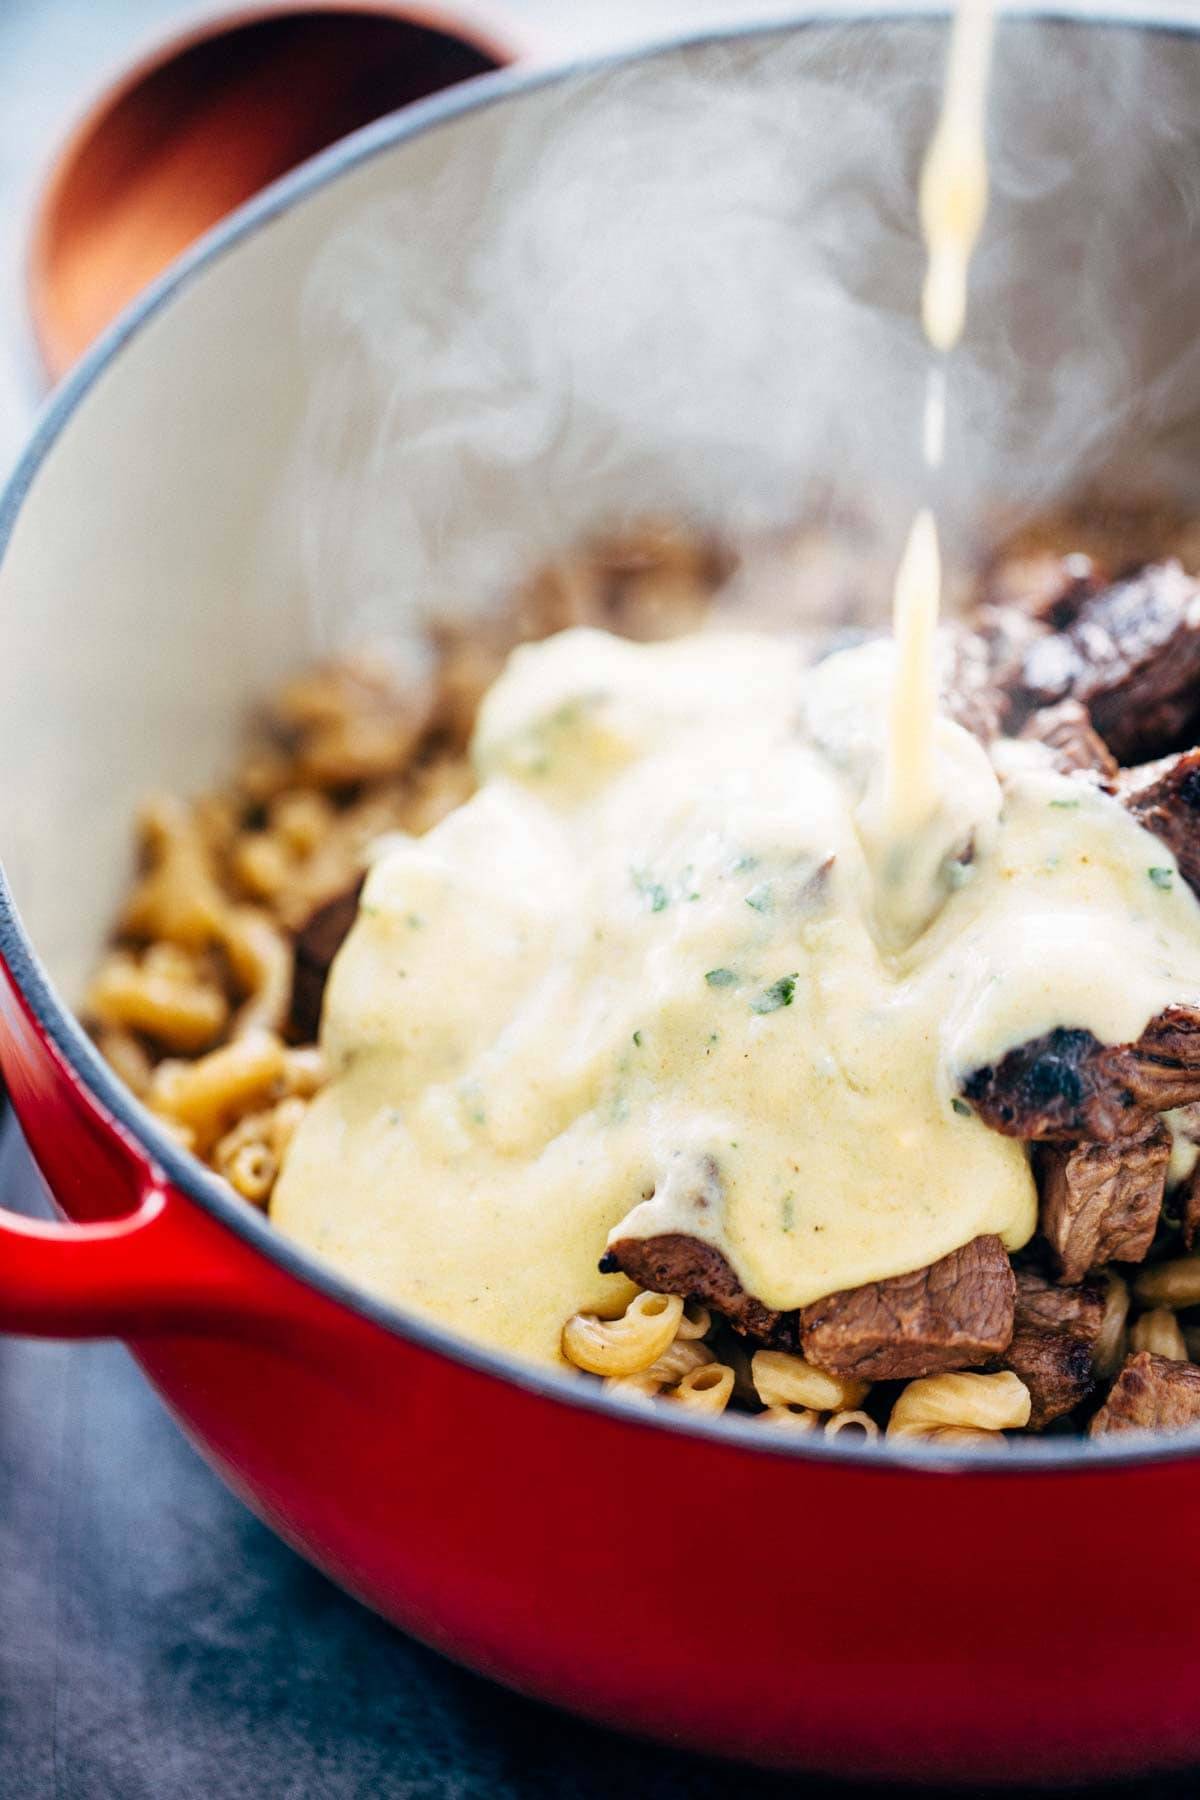 Creamy sauce on steak and noodles.